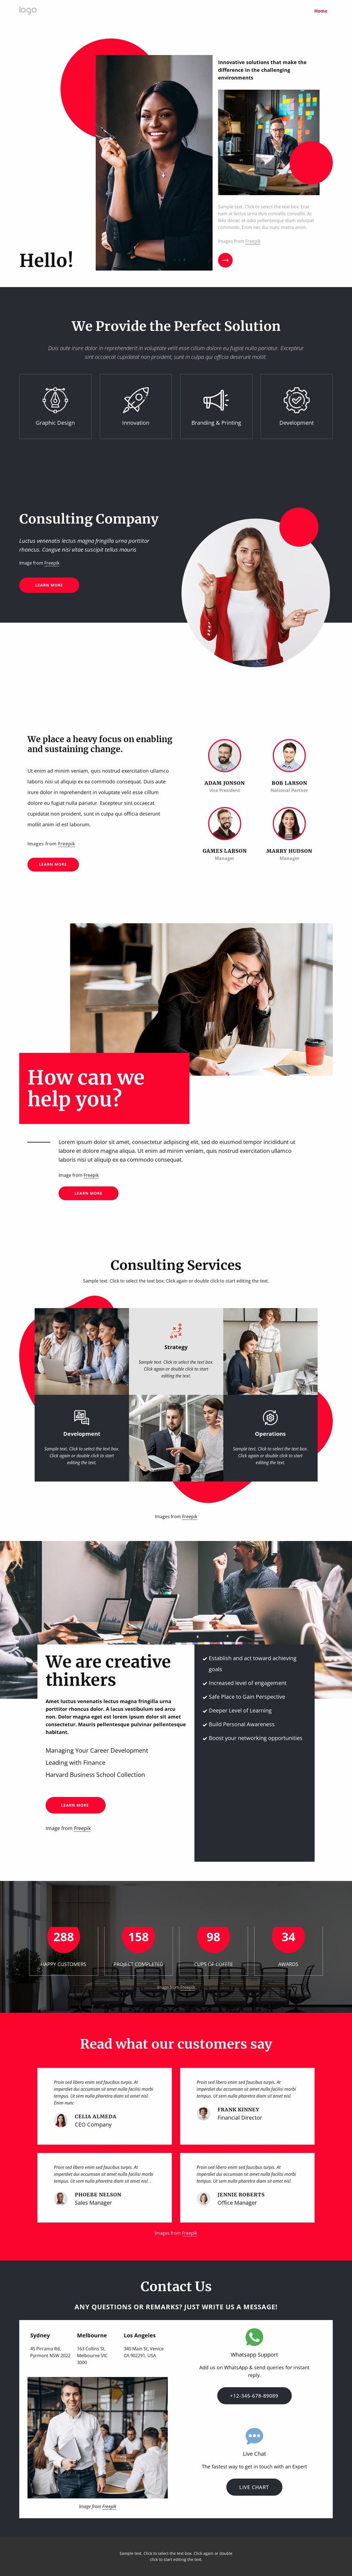 Consulting company NYC Website Mockup